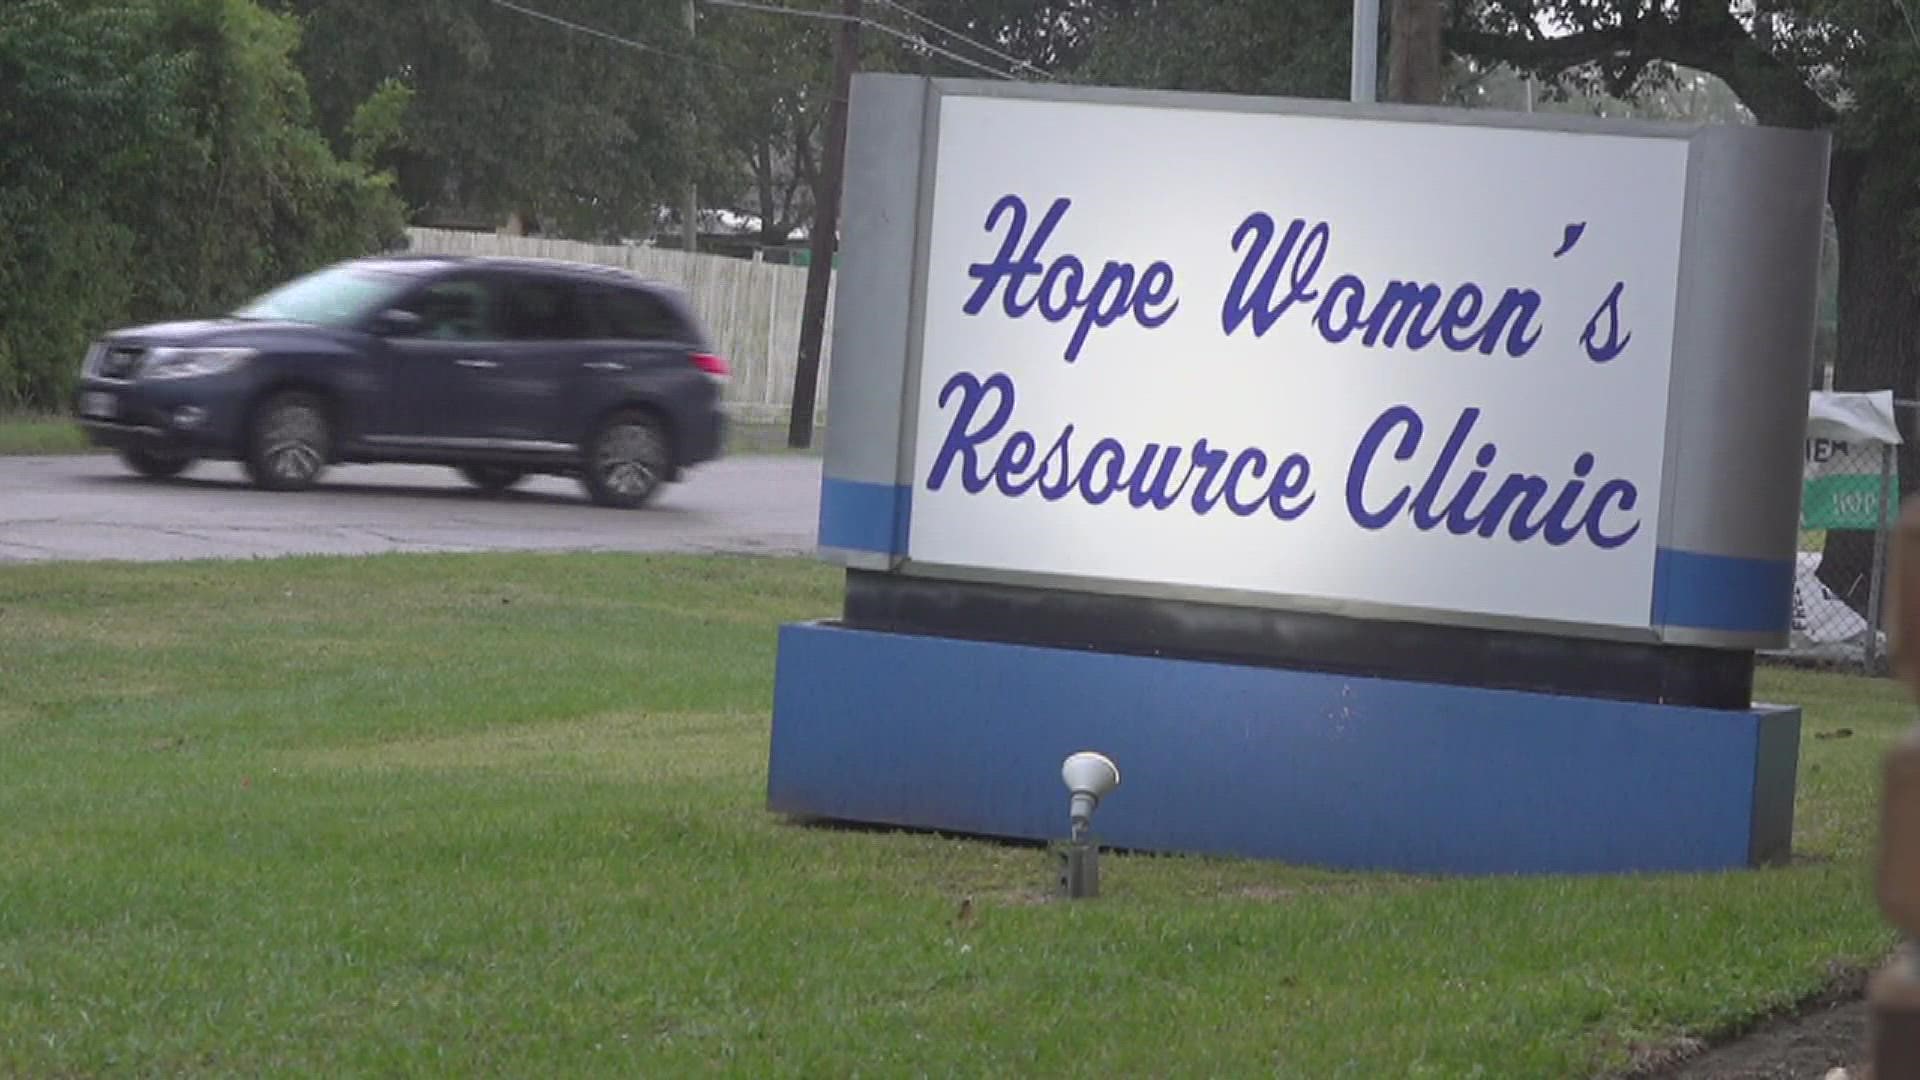 The Hope Women's Resource Clinic is hosting its annual gala Tuesday night to raise funds to support women across the Golden Triangle. For info call (409) 898-4005.